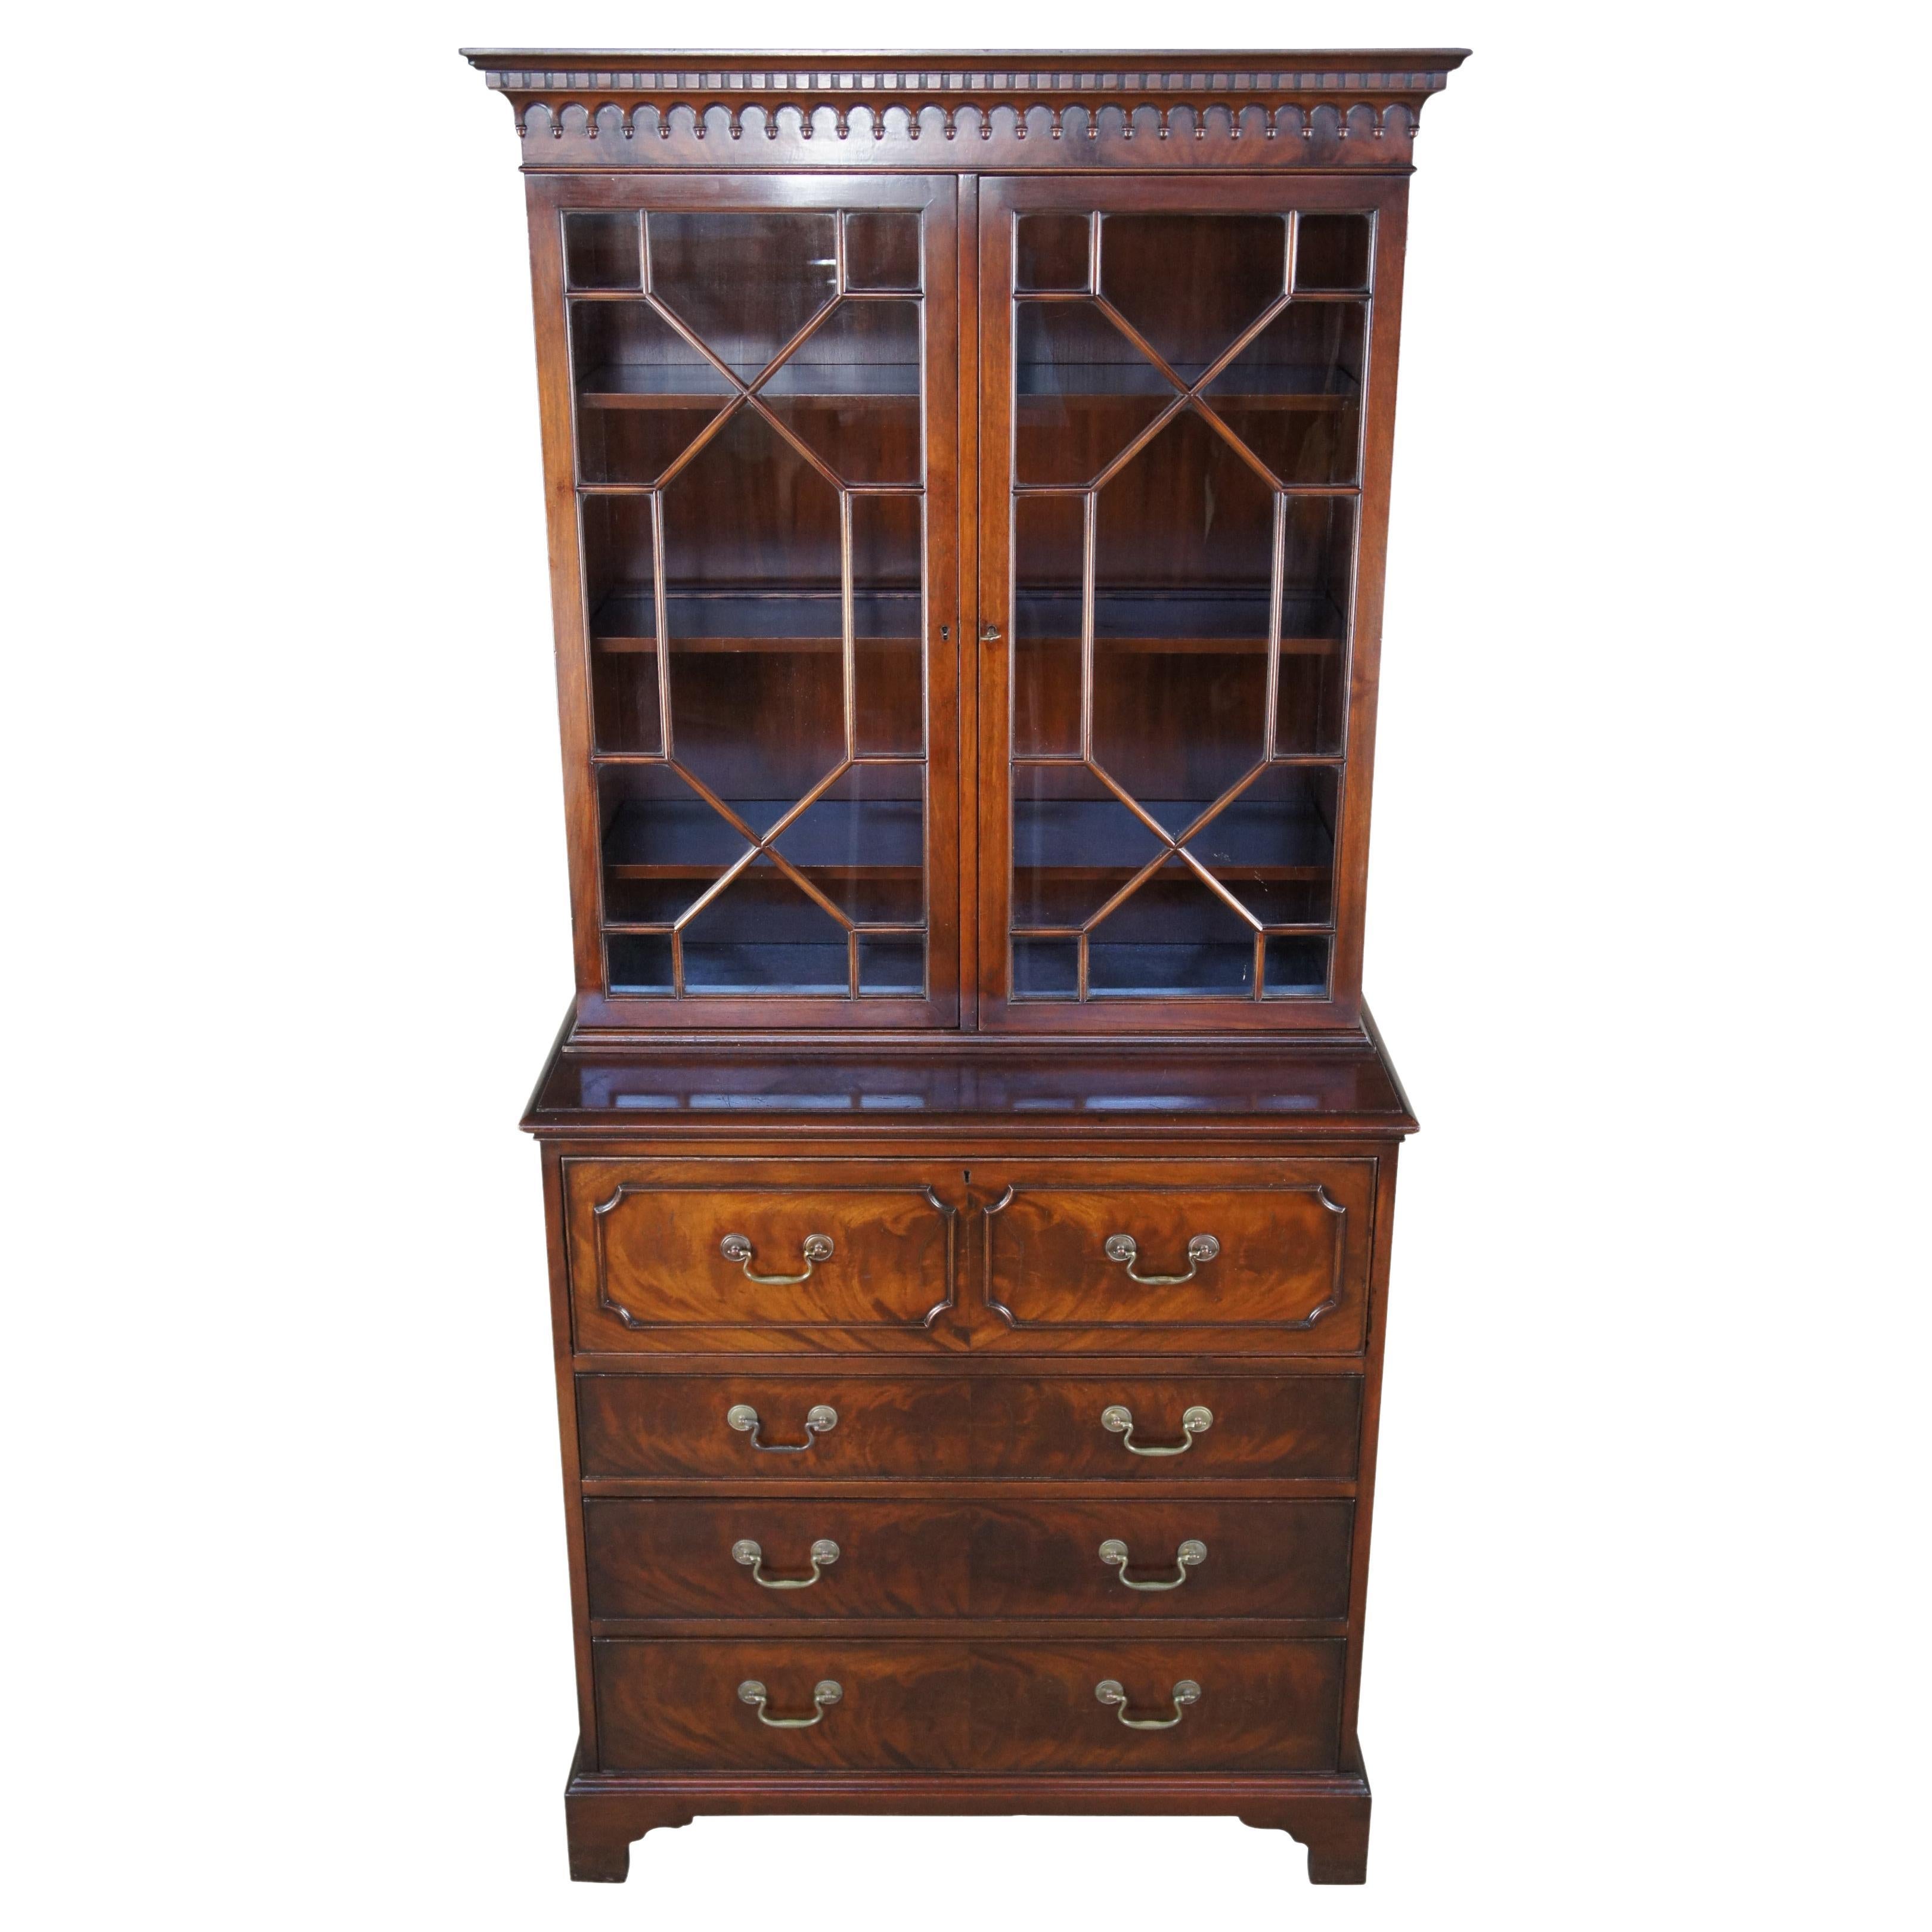 Antique Warsaw Furniture Mfg Co Federal or Georgian stepback butlers secretary desk and bookcase. Made of flamed mahogany with upper bookcase cabinet that features fretwork glass doors and dentil crown with arcade molding. The lower lower secretary